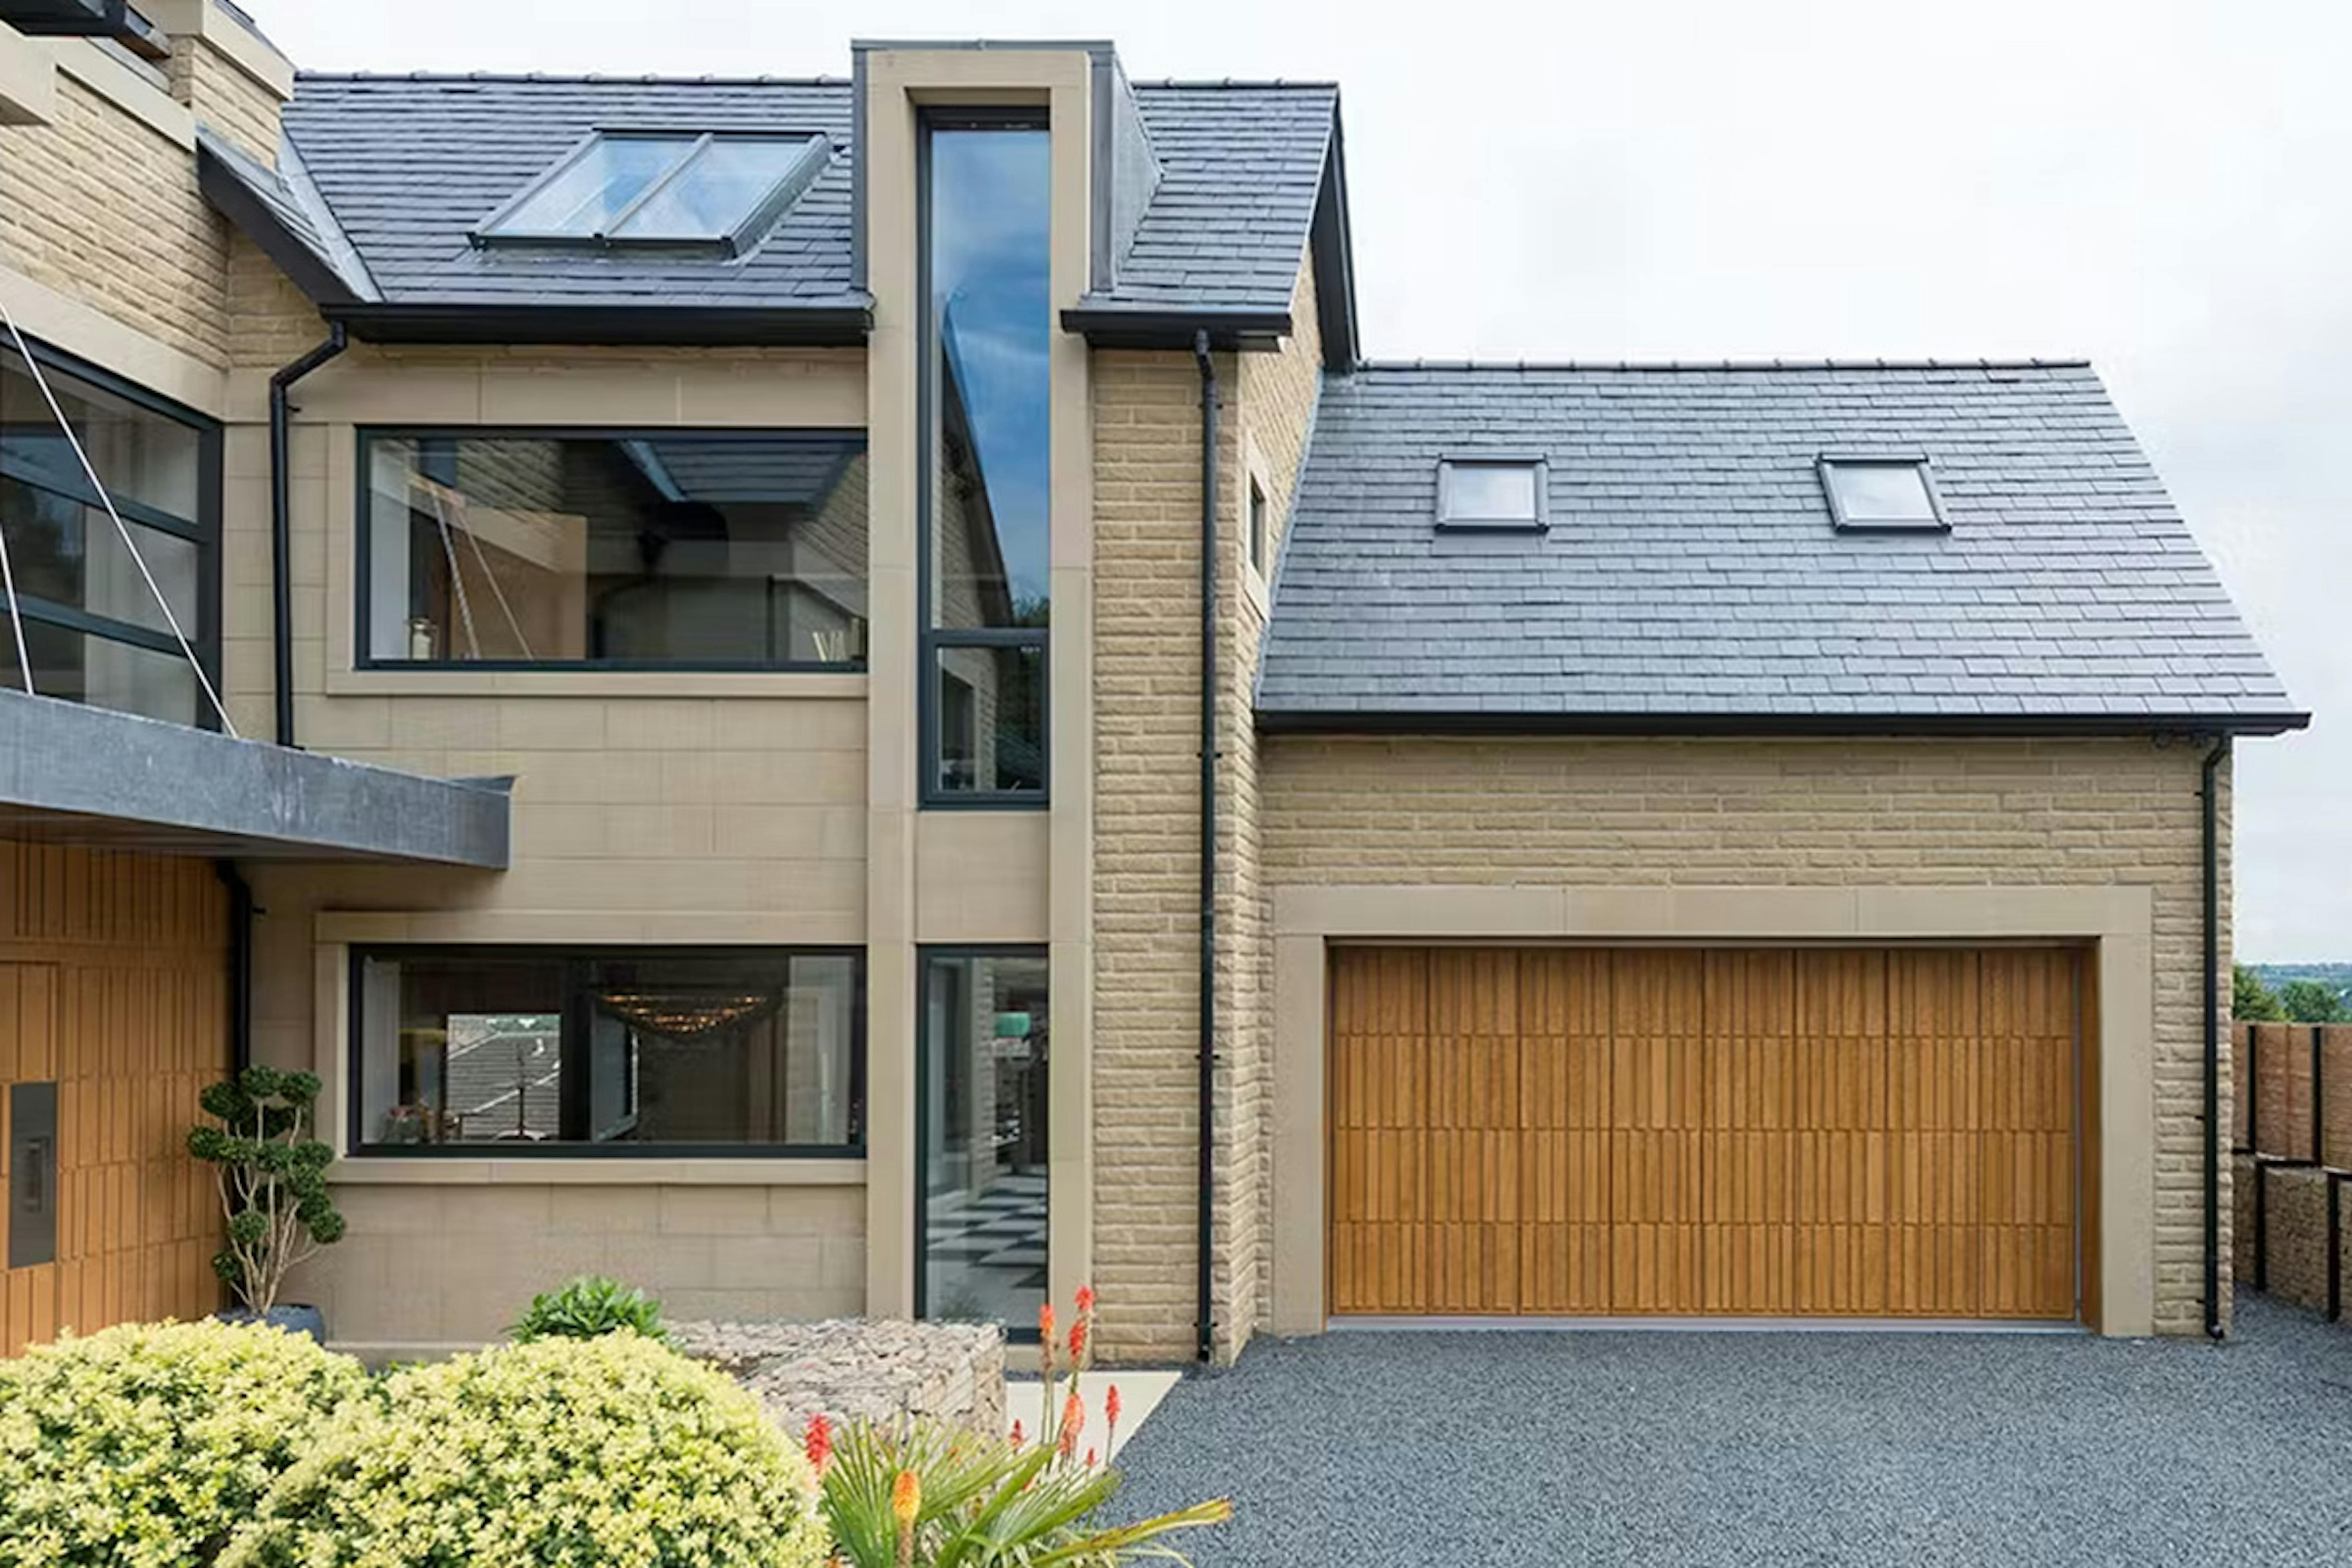 When to get planning permission for a self-build